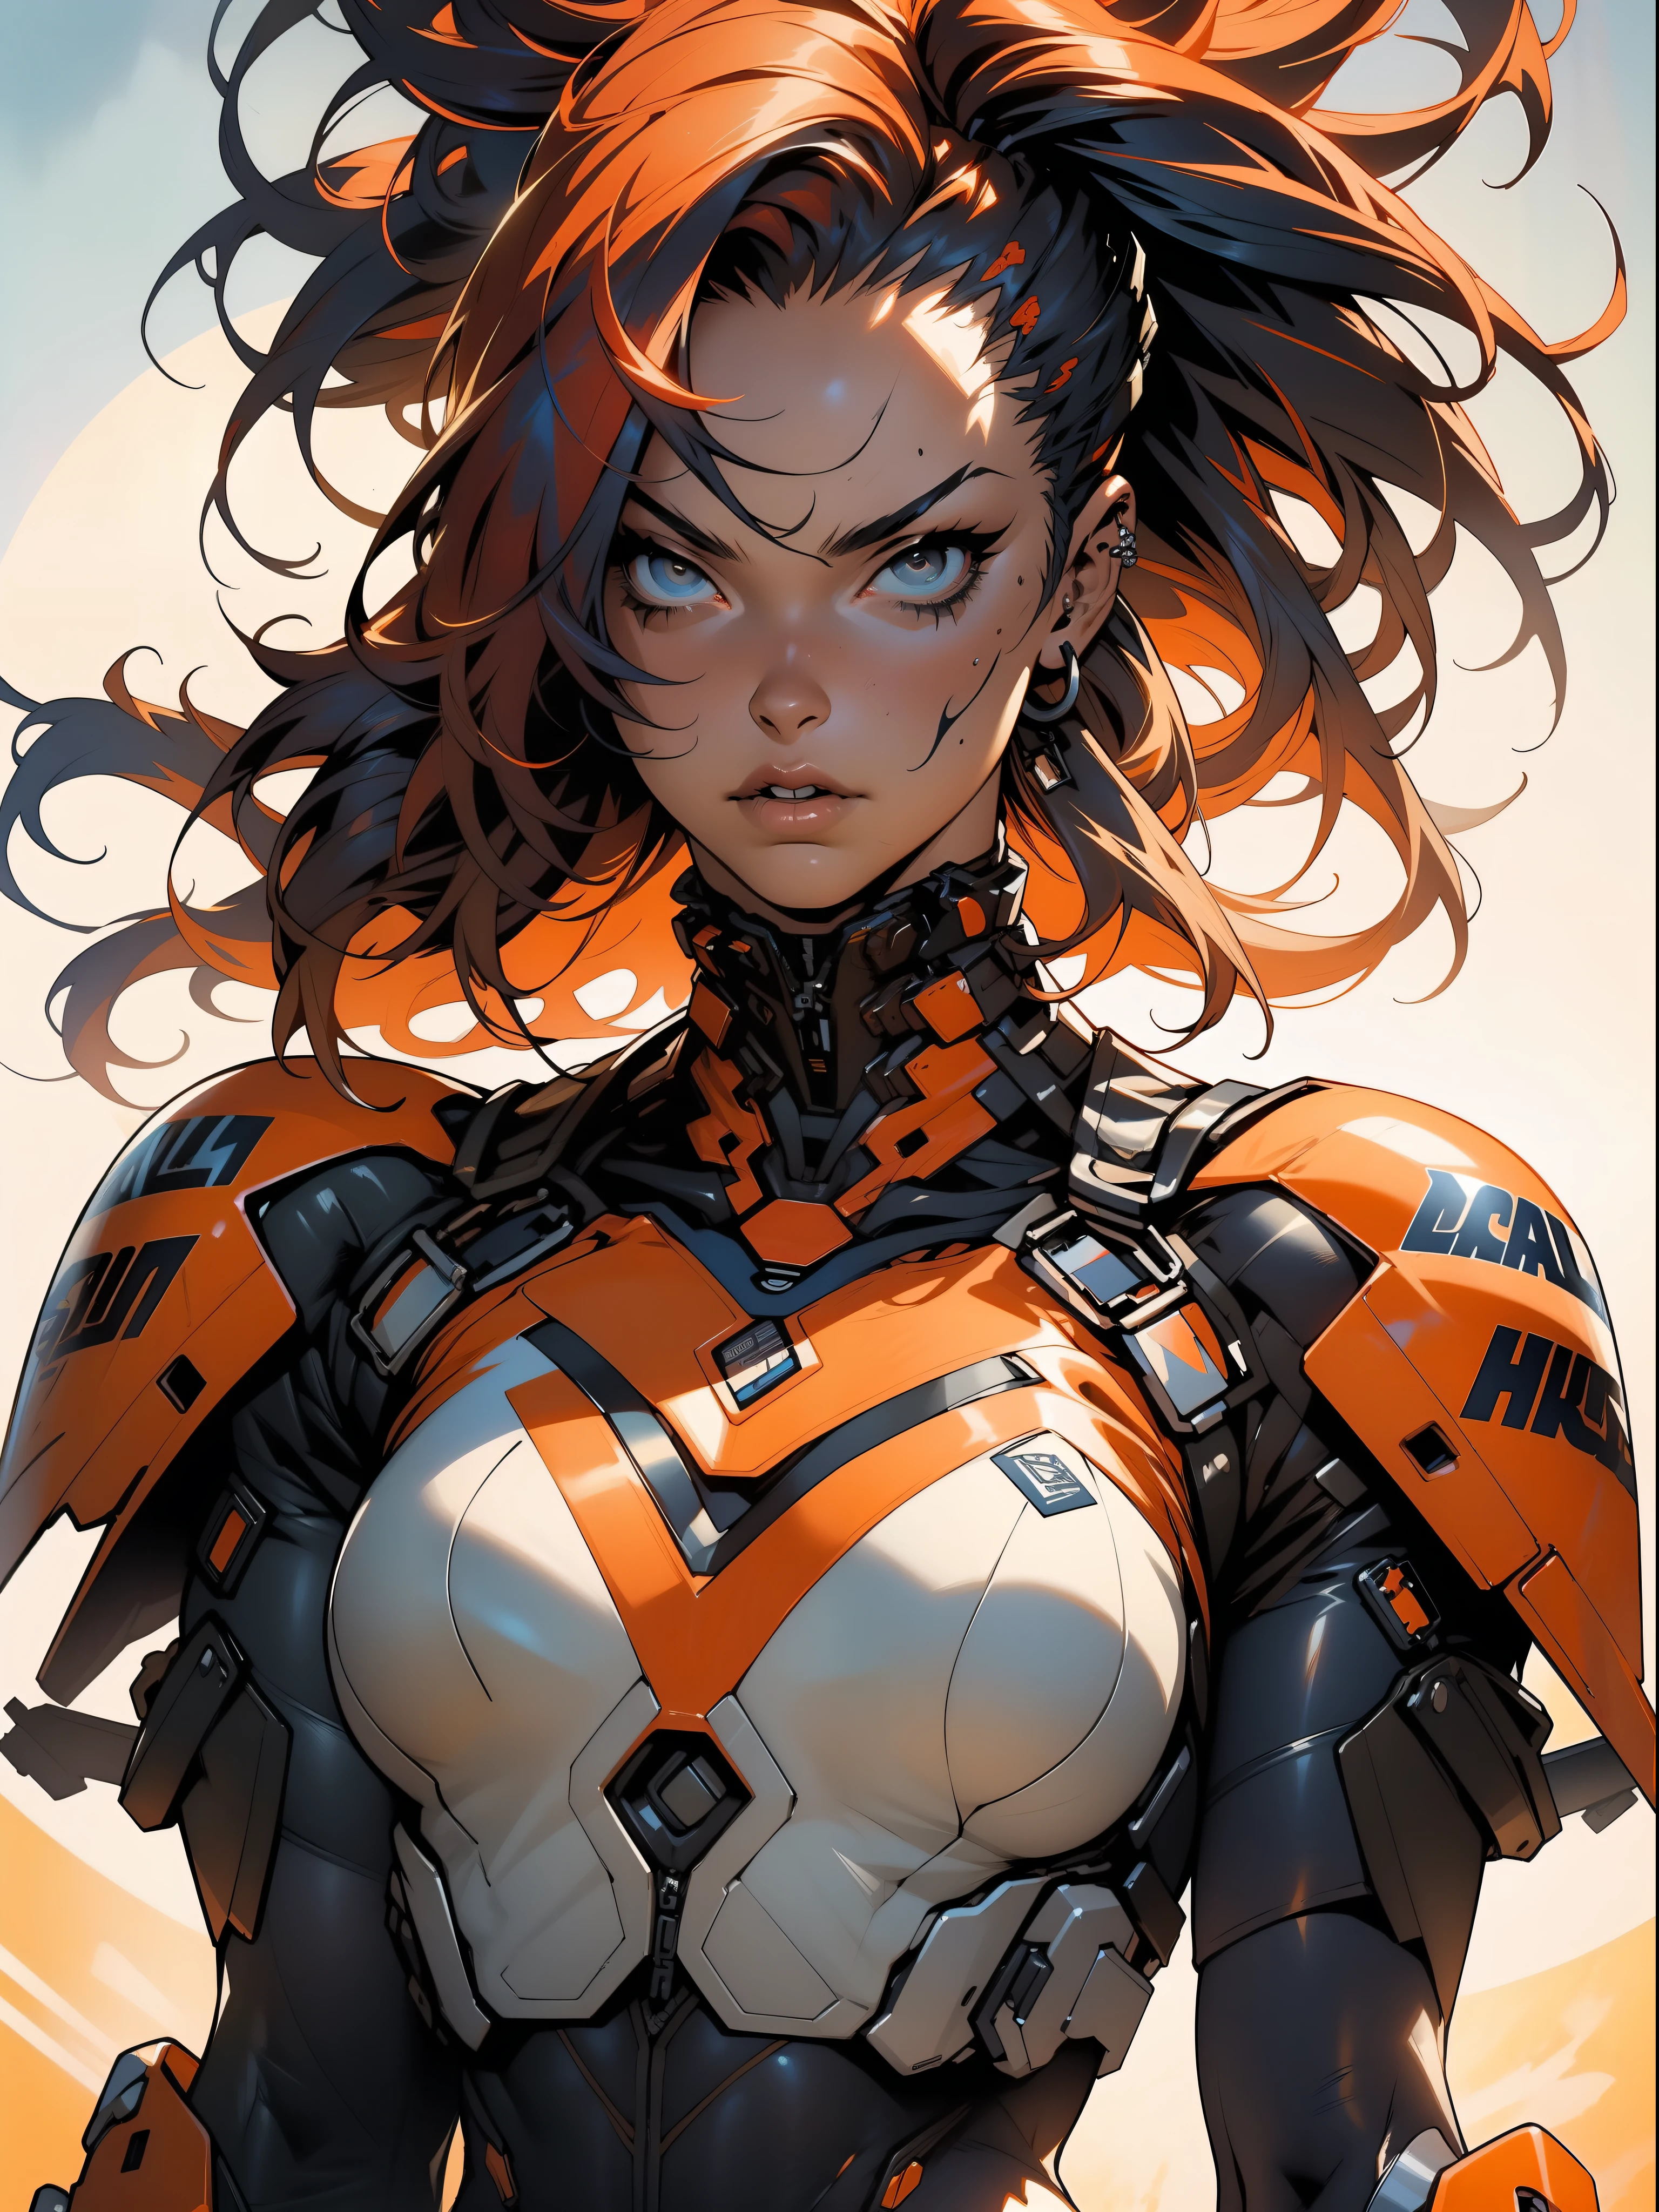 (((woman))), (((best quality))), (((masterpiece))), (((adult))), A muscular 35-year-old warrior woman nearly naked in Simon Bisley's urban savage style for the cover of Heavy Metal magazine, colorful mohawk hair, Minimal clothing, orange and blue carbon fiber armor full of ink-stained spikes and rivets,